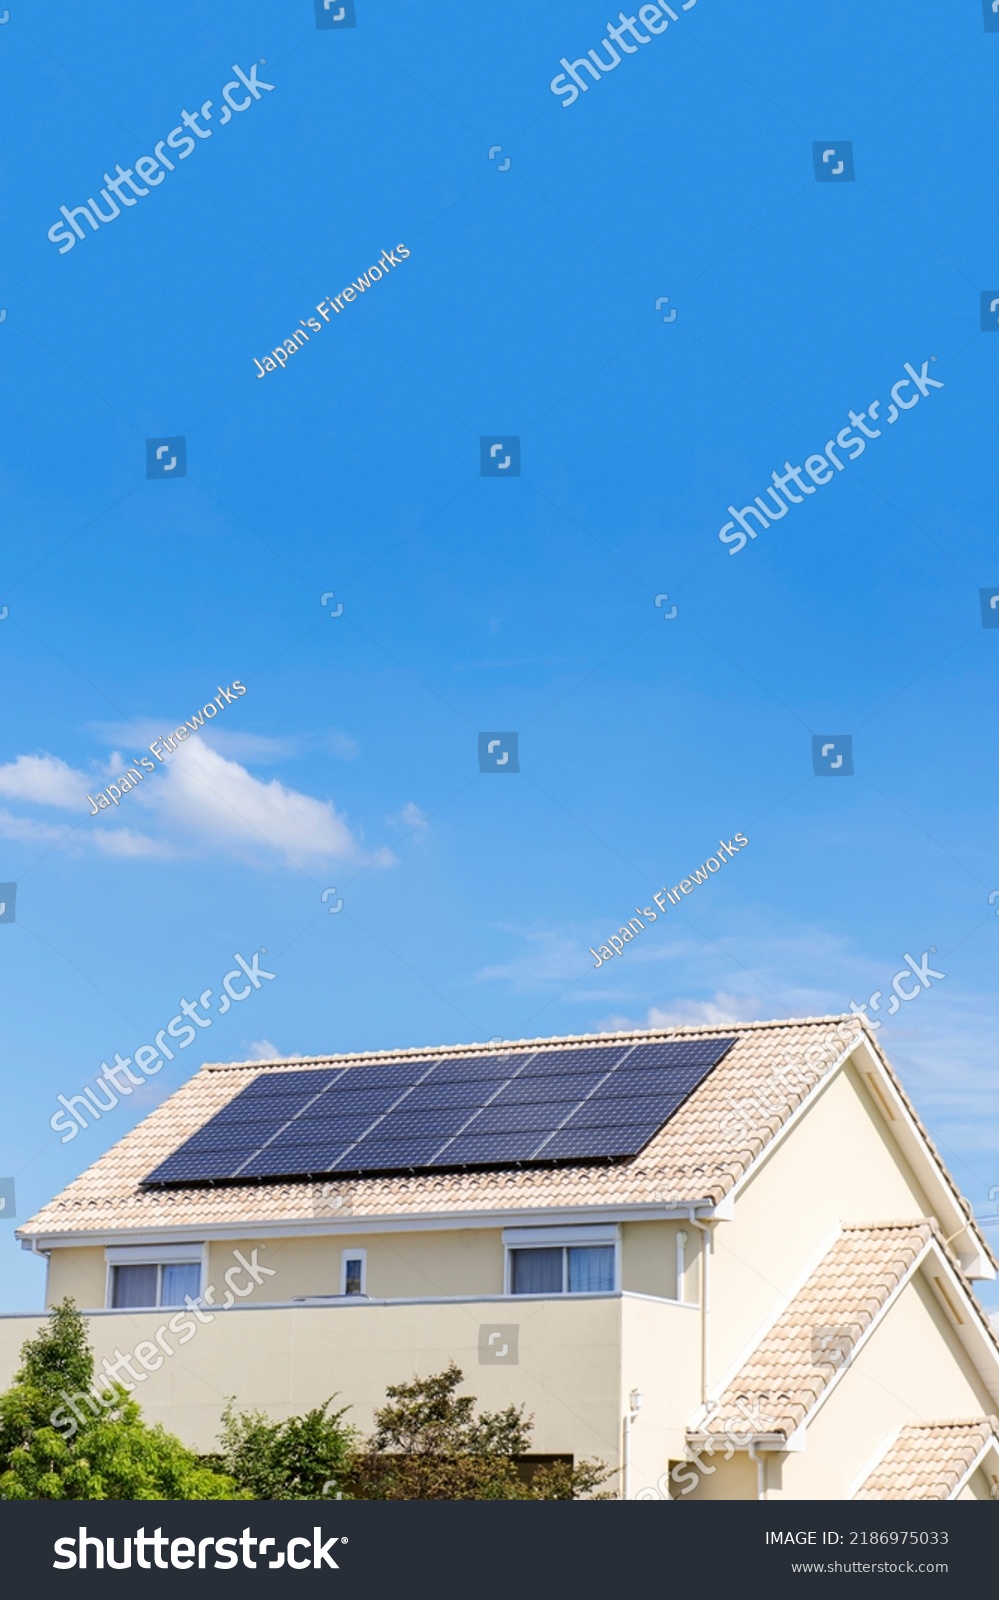 A house with solar panels on the roof.
Environmentally ecology concept. #2186975033